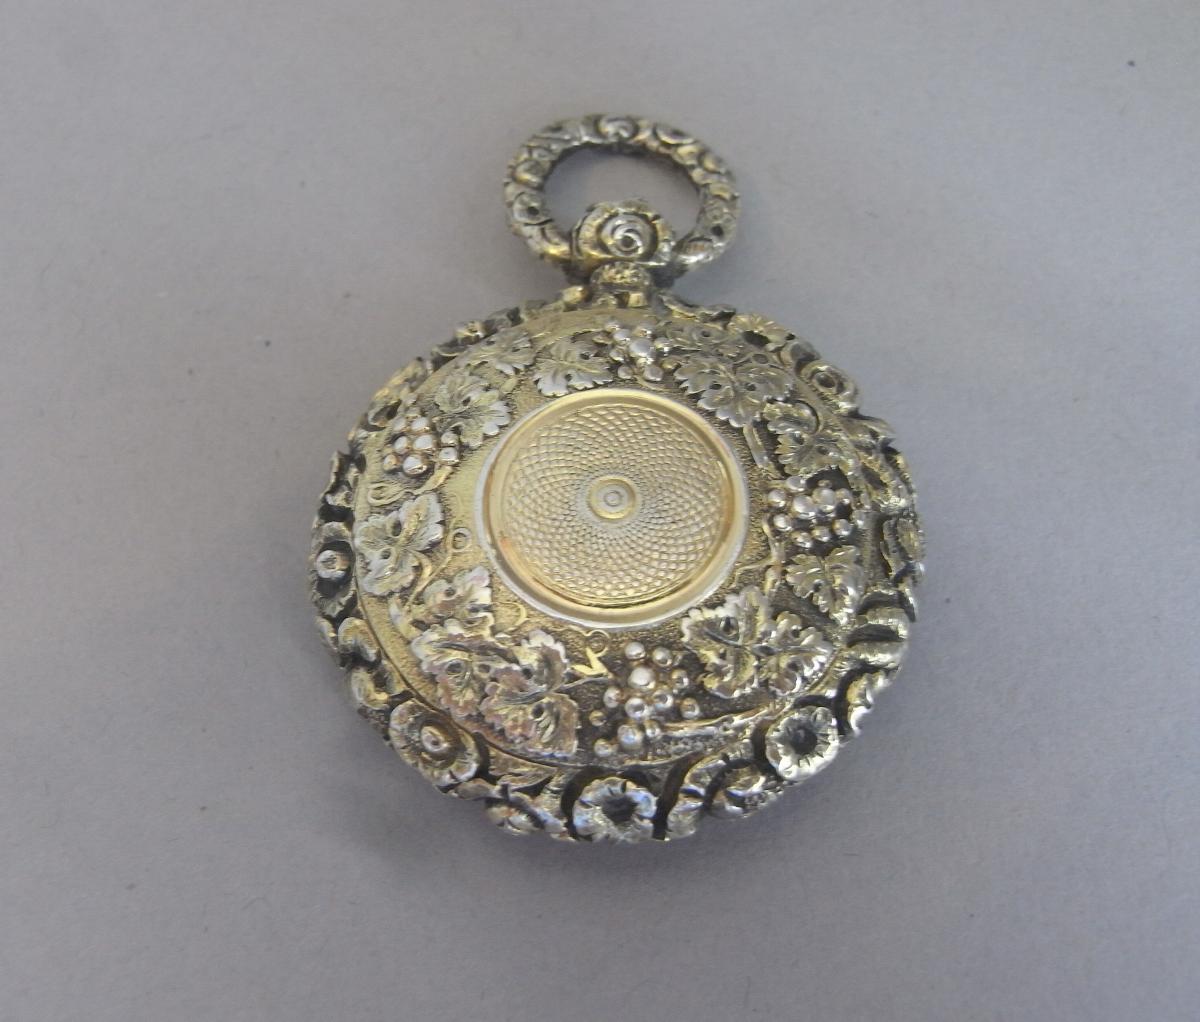 An exceptionally fine George III cast silver gilt Vinaigrette, modelled as a Fob Watch, made in Birmingham in 1818 by Samuel Pemberton